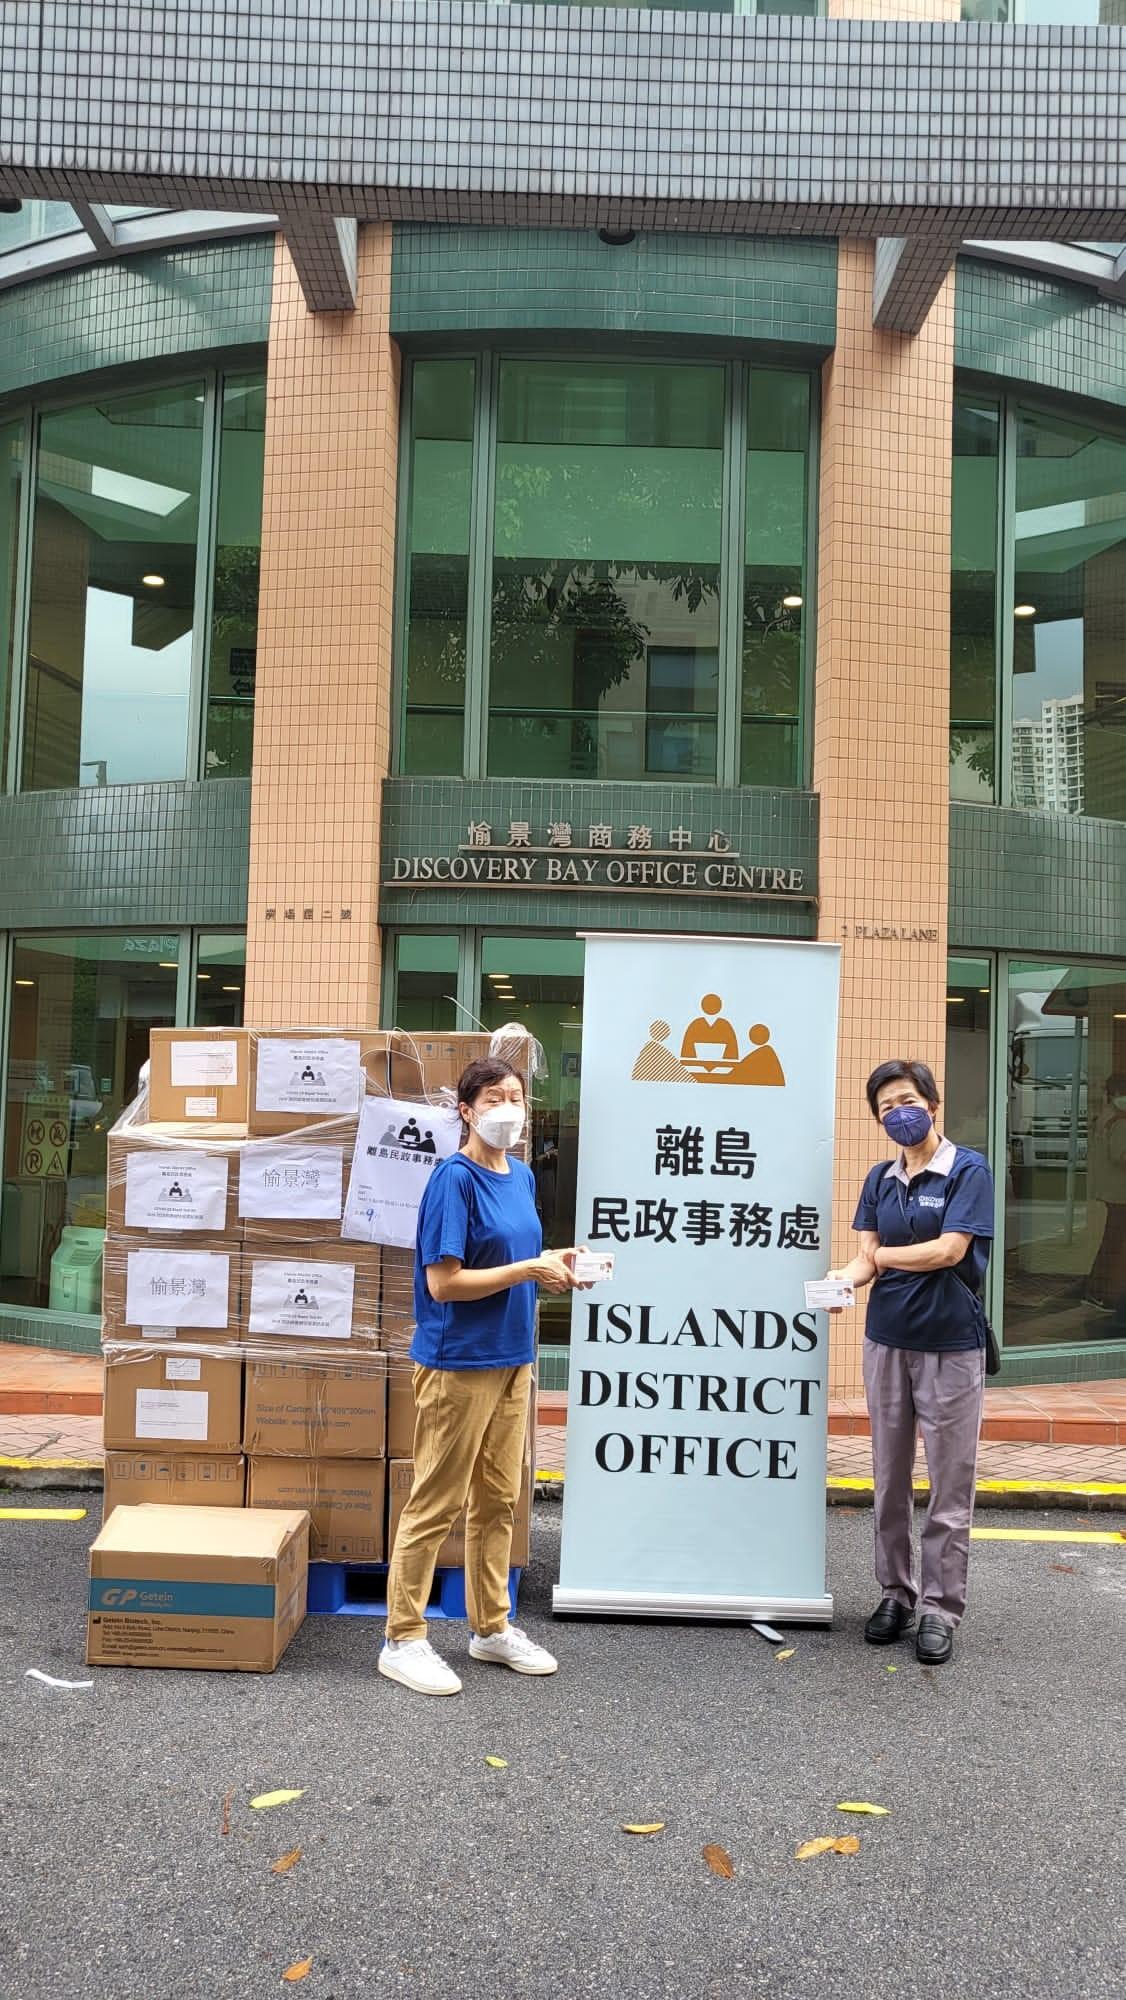 The Islands District Office today (June 10) distributed COVID-19 rapid test kits to households, cleansing workers and property management staff living and working in Discovery Bay for voluntary testing through the property management company.